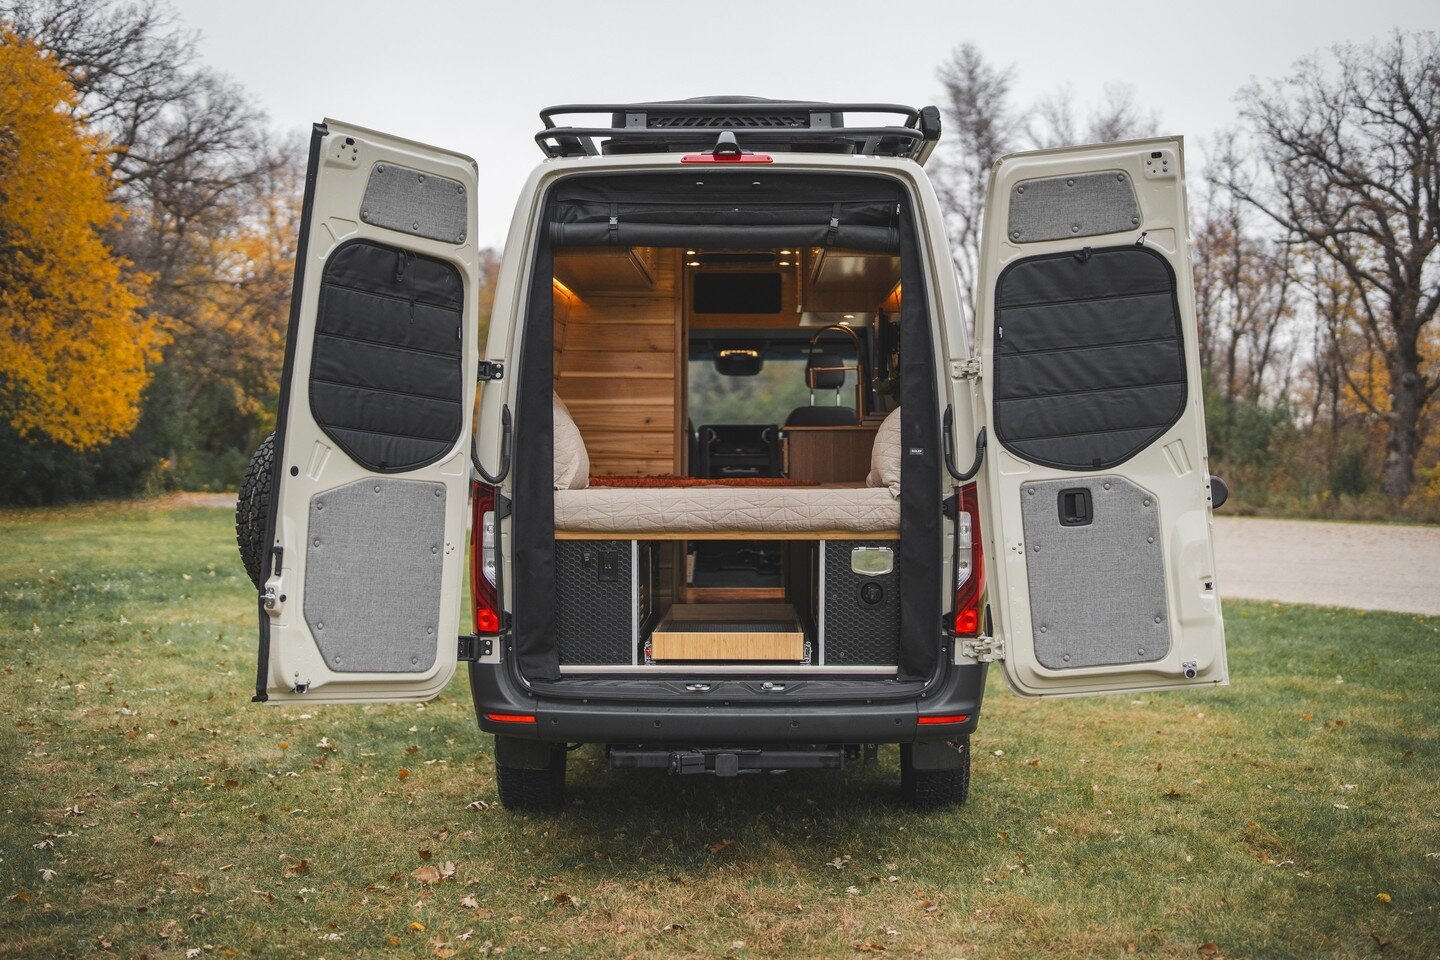 This client-designed camper van is on the road! Our newest and improved MK2, a two-person campervan, featuring a host of exciting enhancements for an authentic off-grid lifestyle and exploration. Keep an eye on our page for more info on the upgrades 